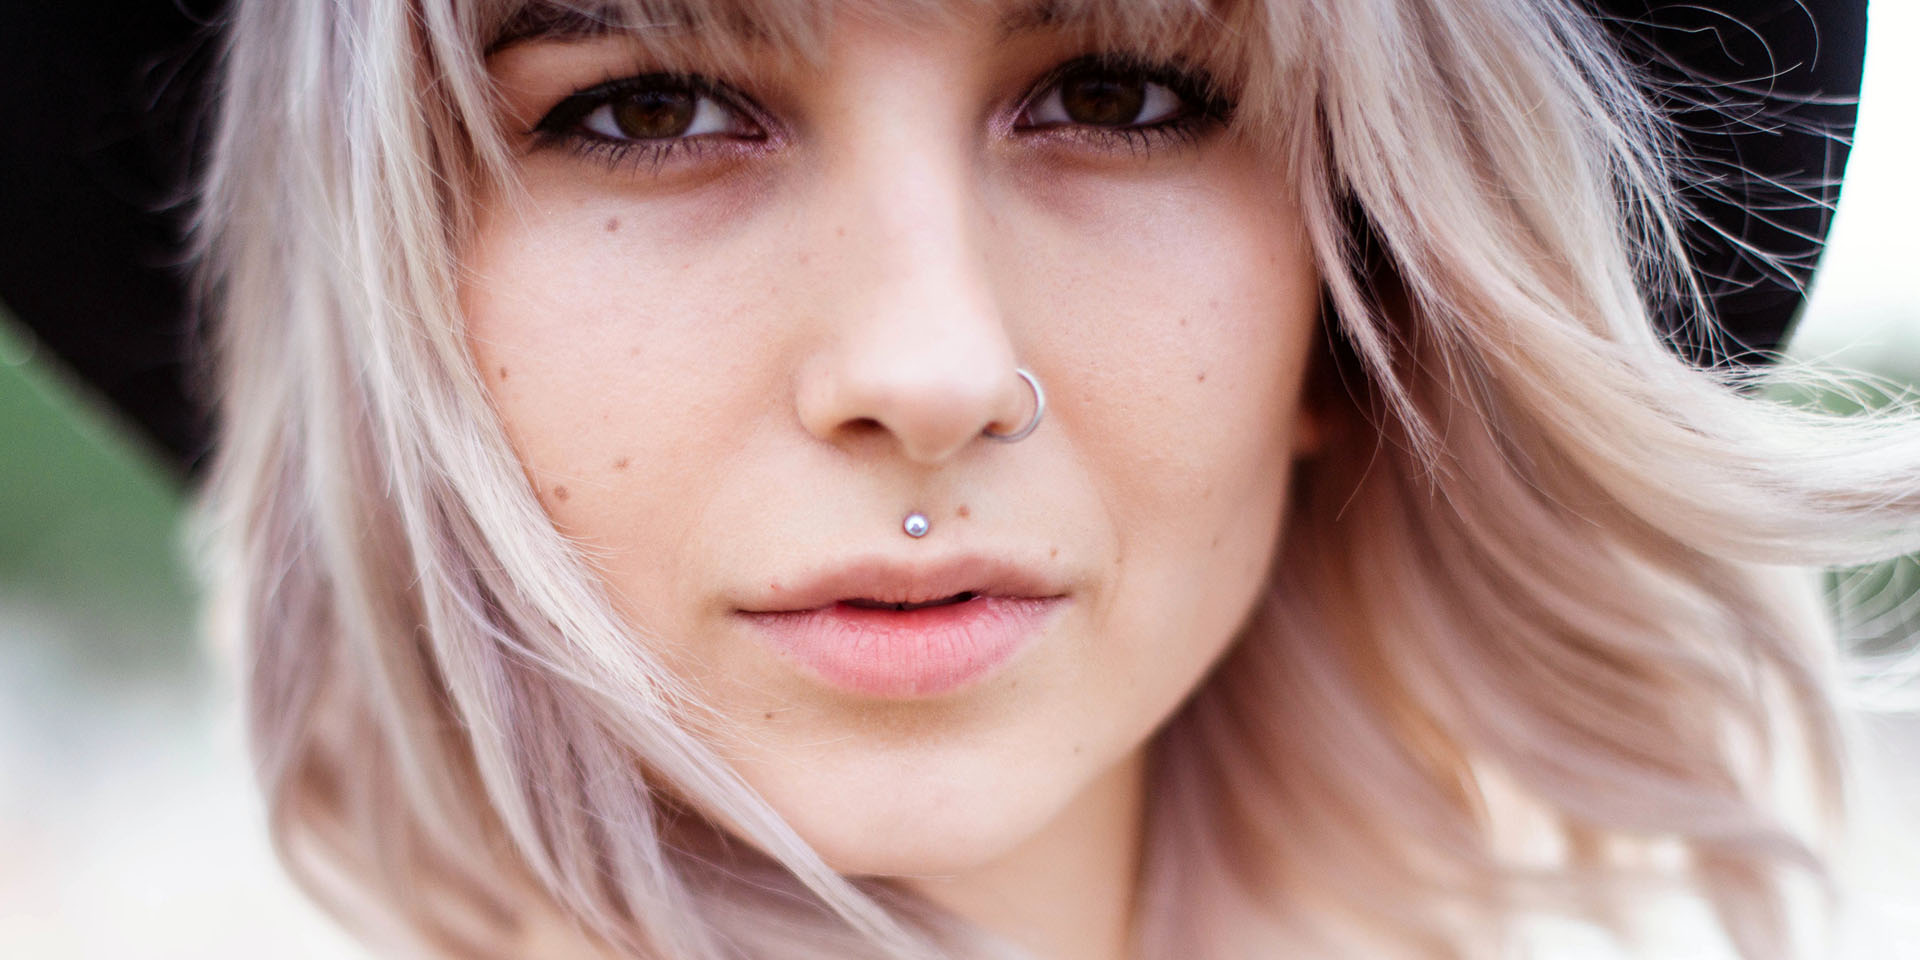 The Medusa Piercing: Everything You Need to Know